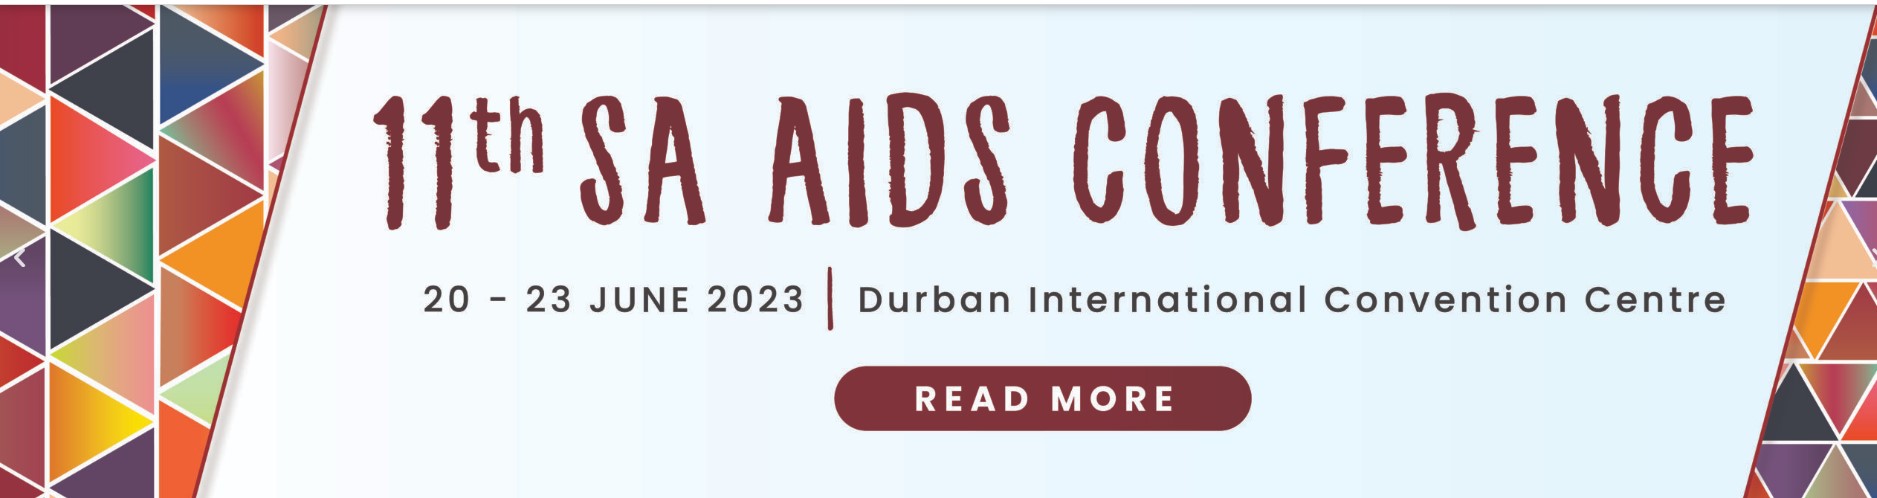 AIDS conference